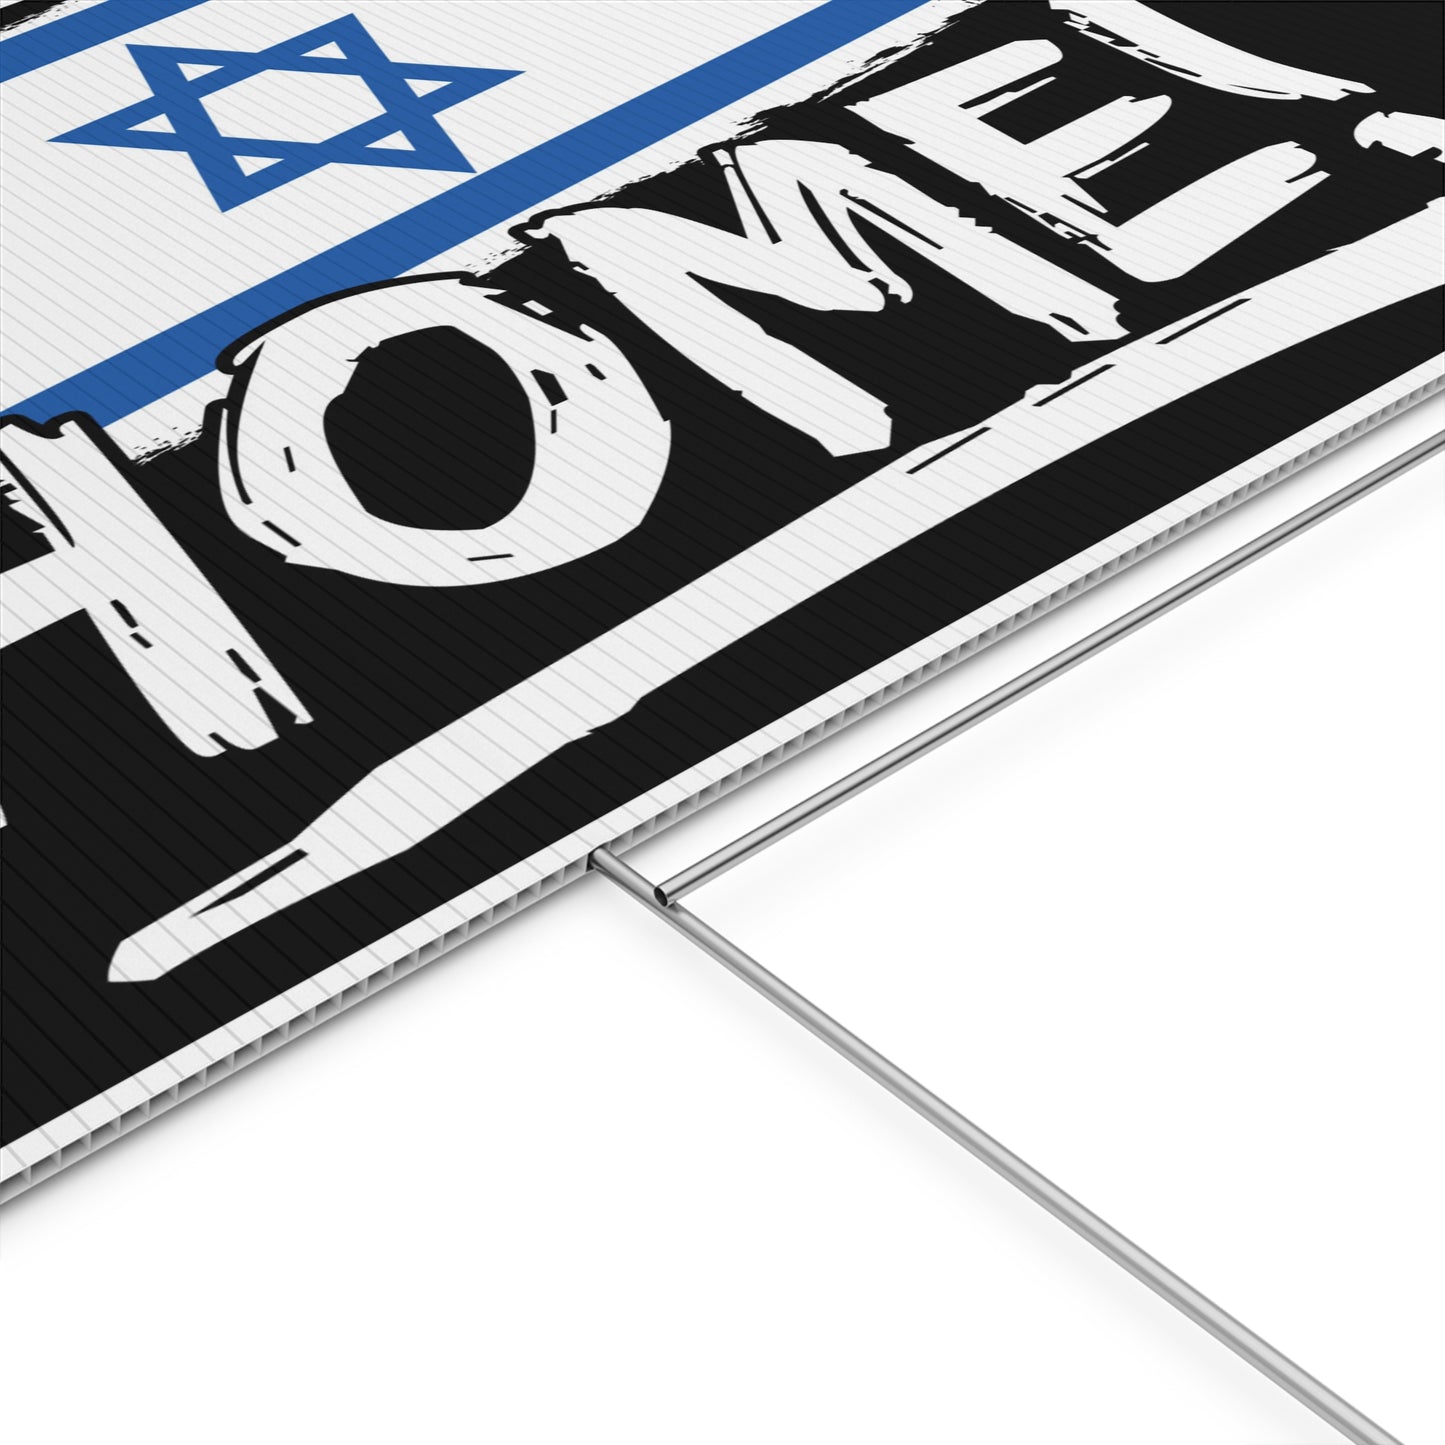 Israel Sign, Bring Home the Hostages, Yard Sign, 18x12, 24x18, or 36x24 inch, Double Sided, H-Stake Included, v2